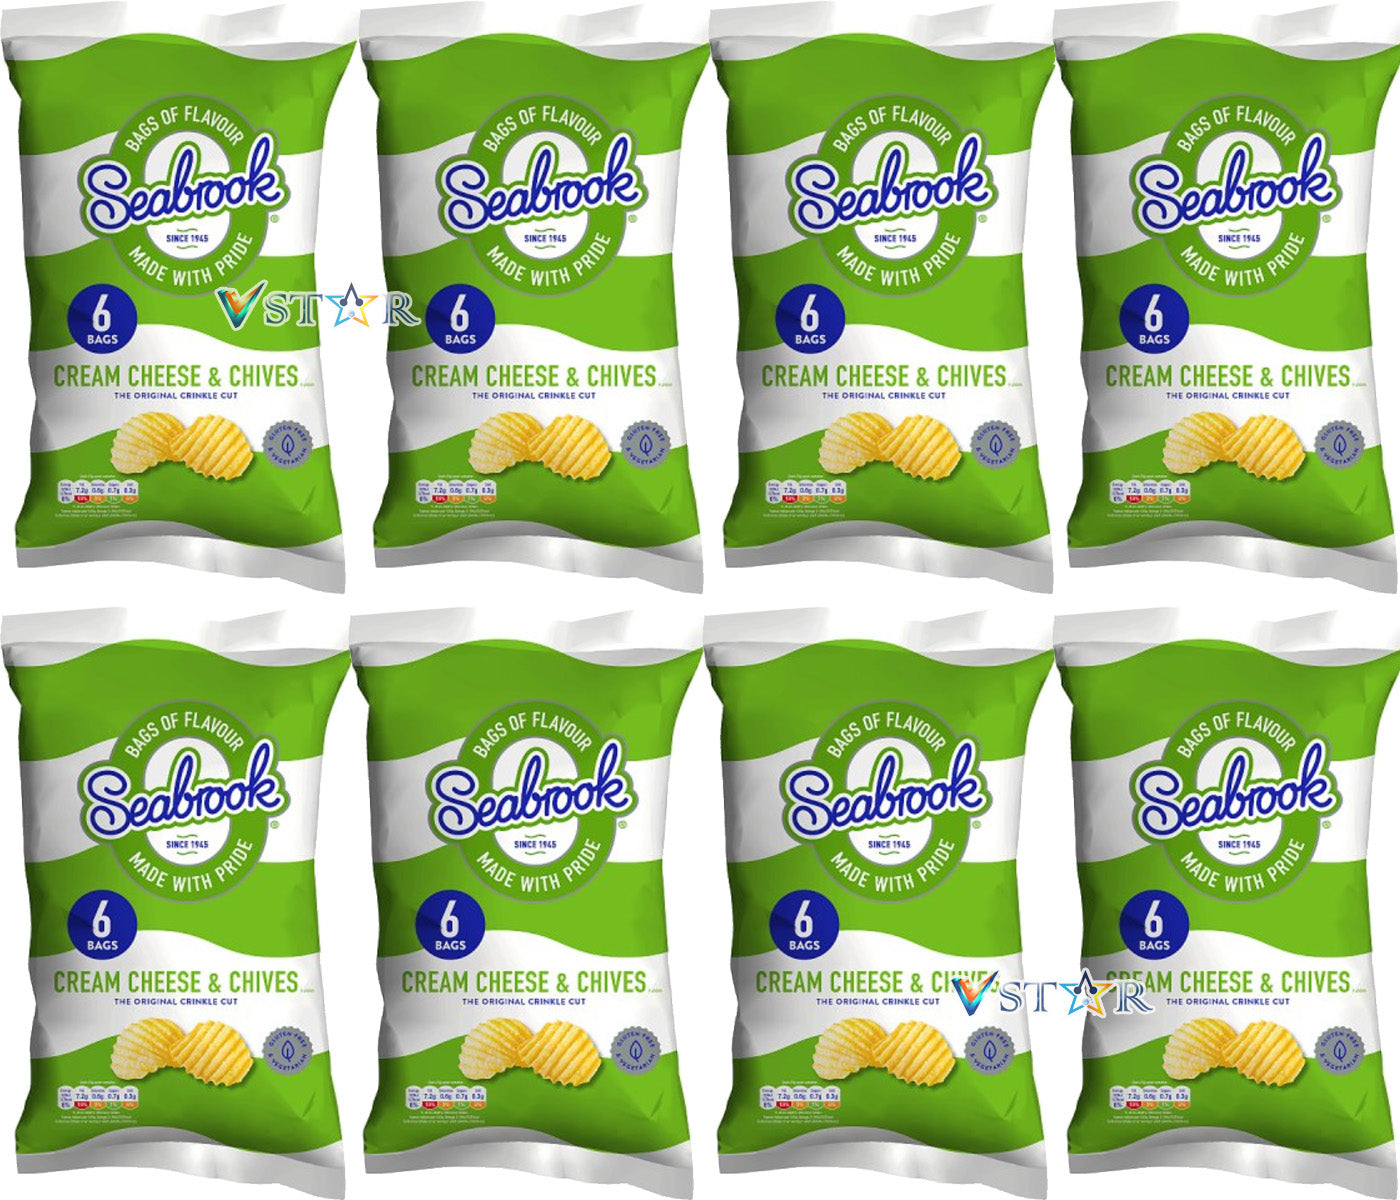 Seabrook Cream Cheese & Chives Flavour 6 x 25g (Case Of 8)